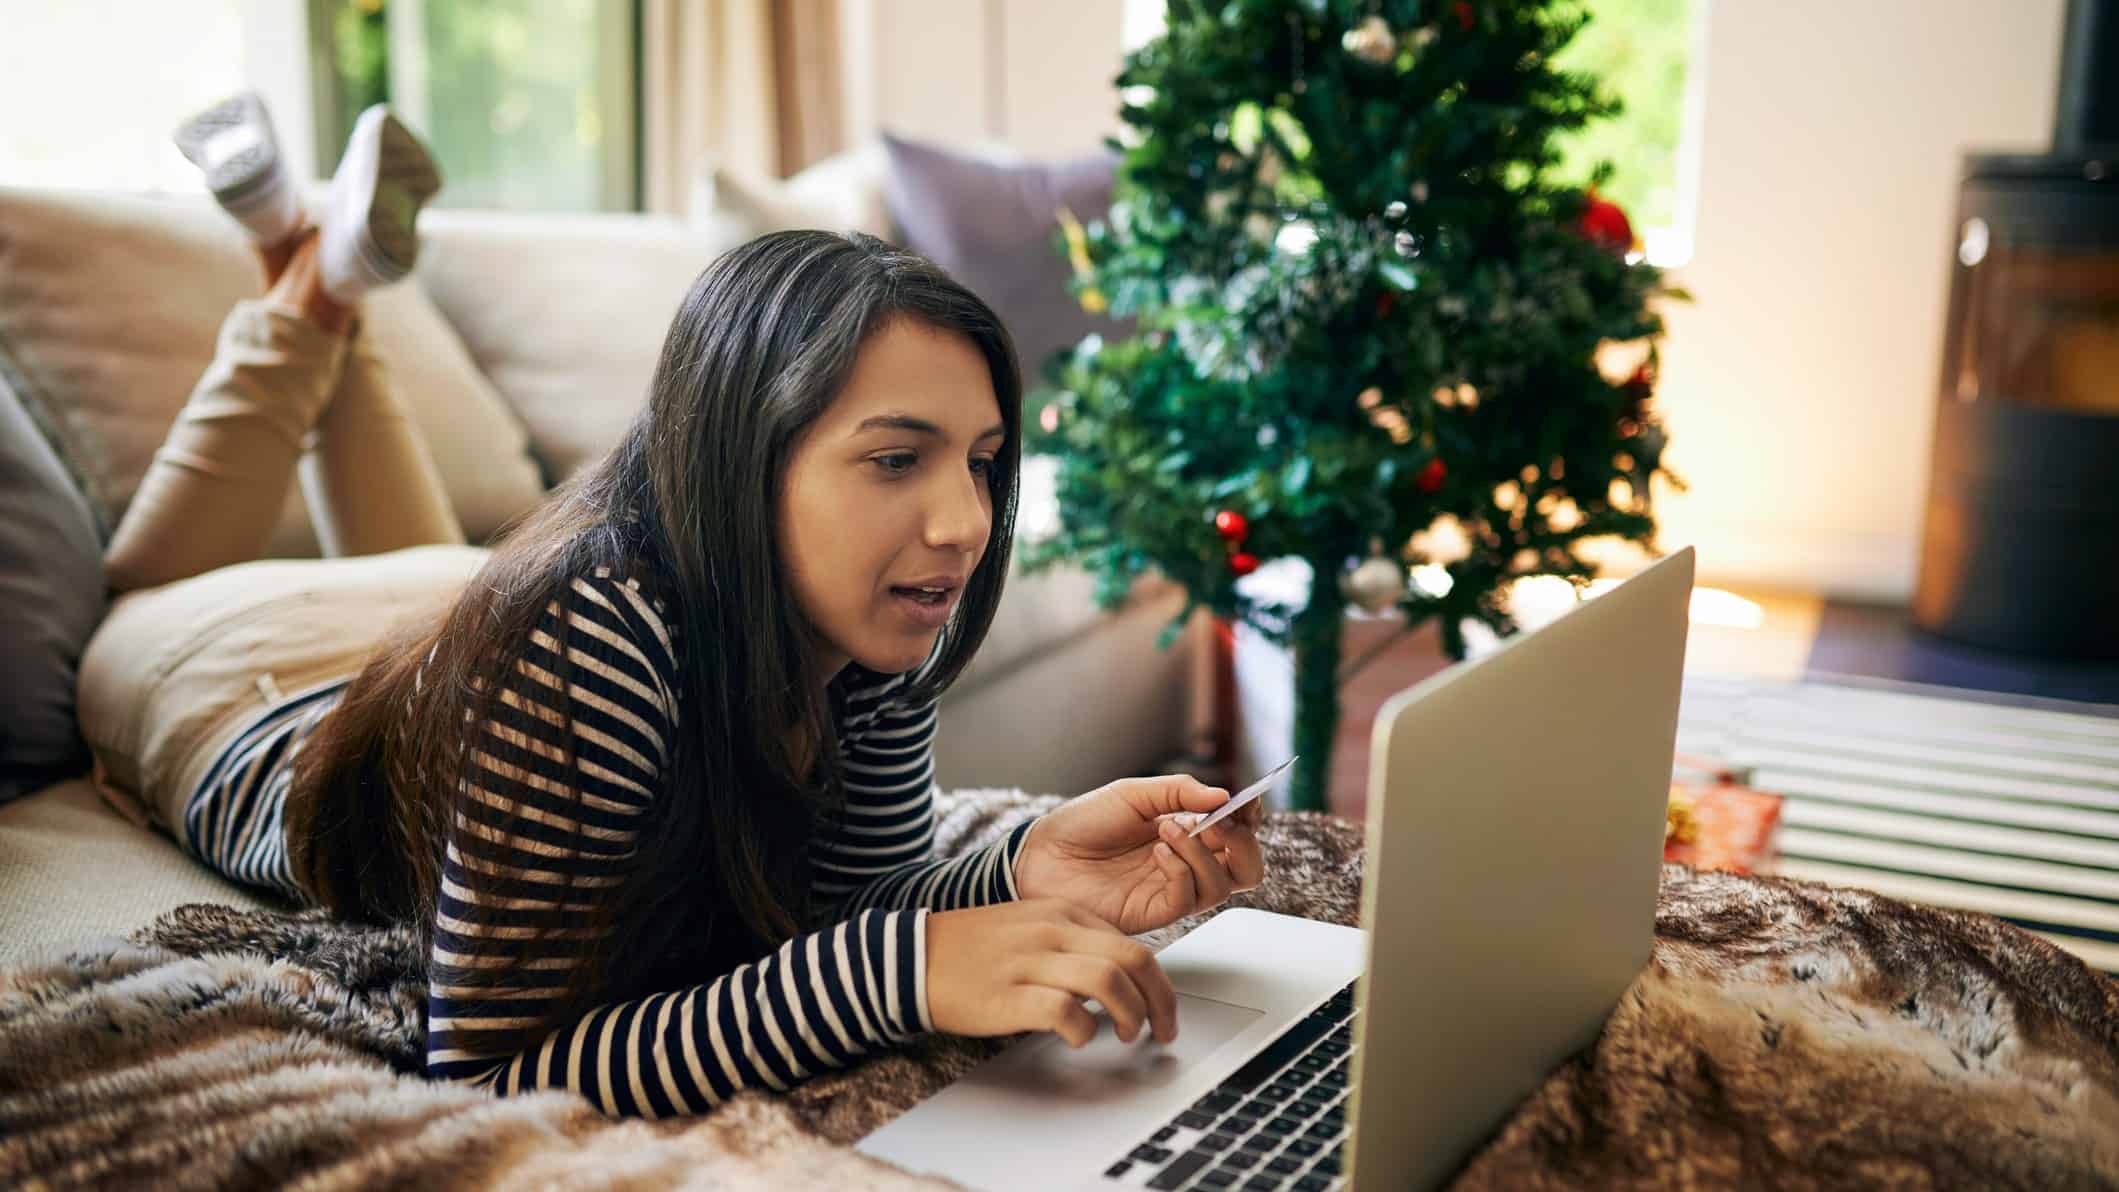 A young woman does her Christmas shopping online in her lounge room at home with a Christmas tree in the background.